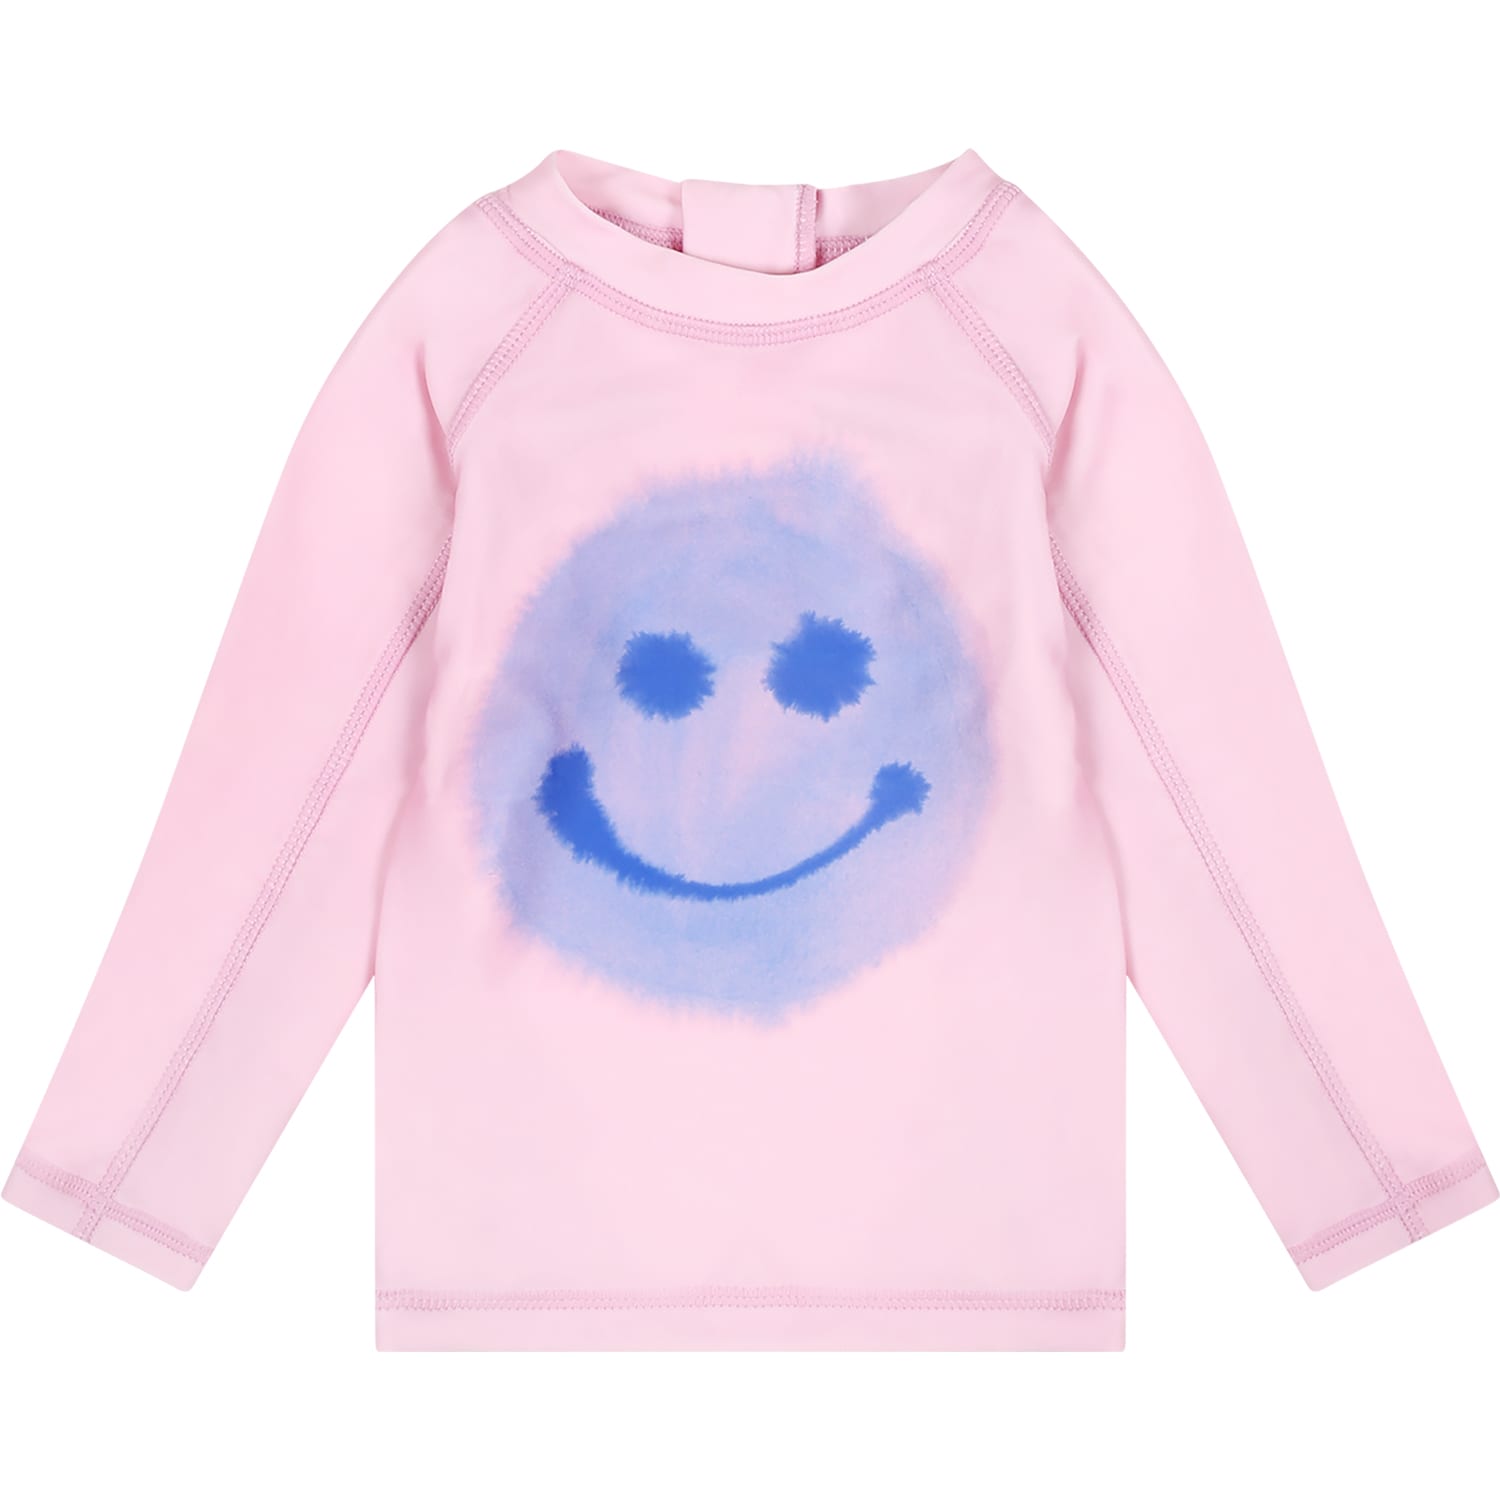 Molo Kids' Pink T-shirt For Baby Girl With Smiley